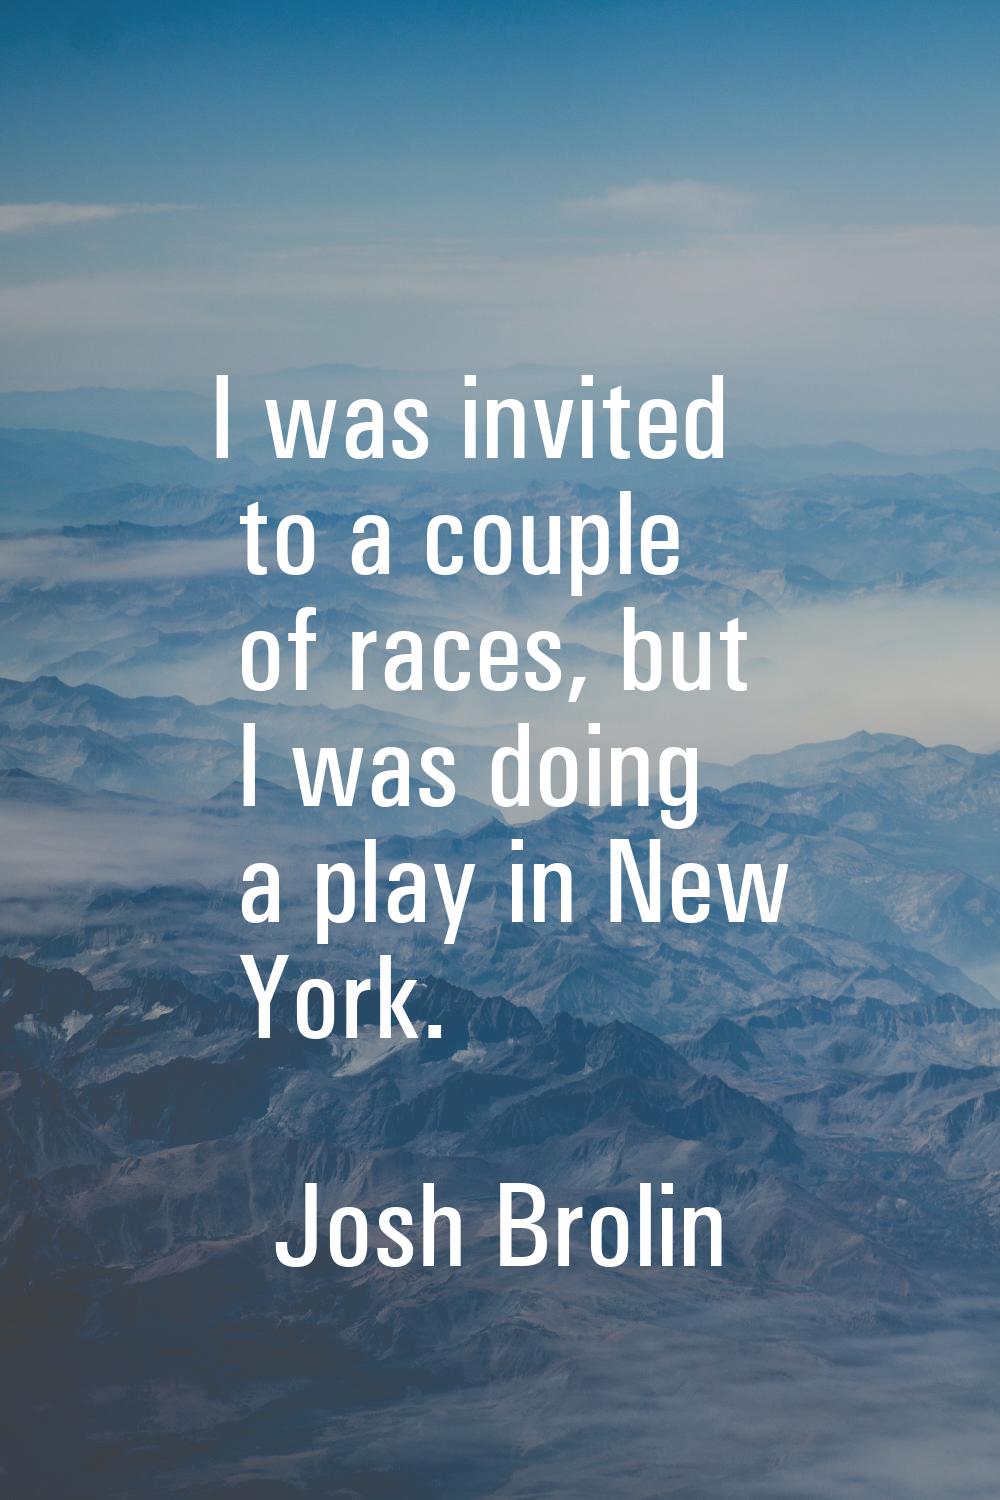 I was invited to a couple of races, but I was doing a play in New York.